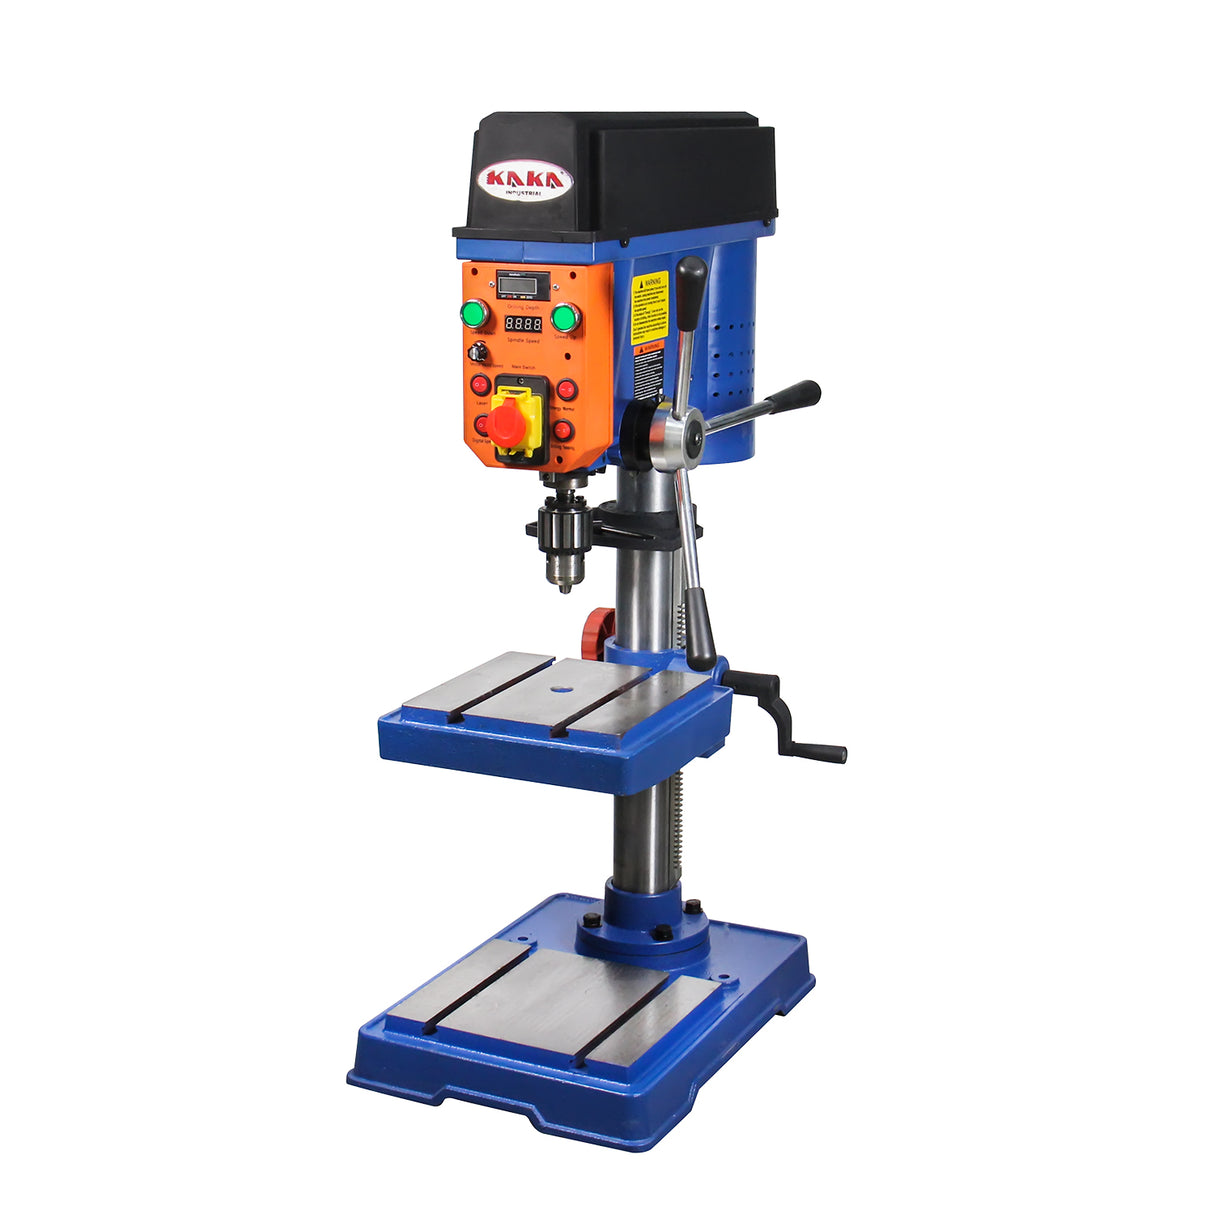 KANG Industrial DP-16, 16mm Benchtop Drill Press, Variable Speed Drill for Metal and Wood Drilling